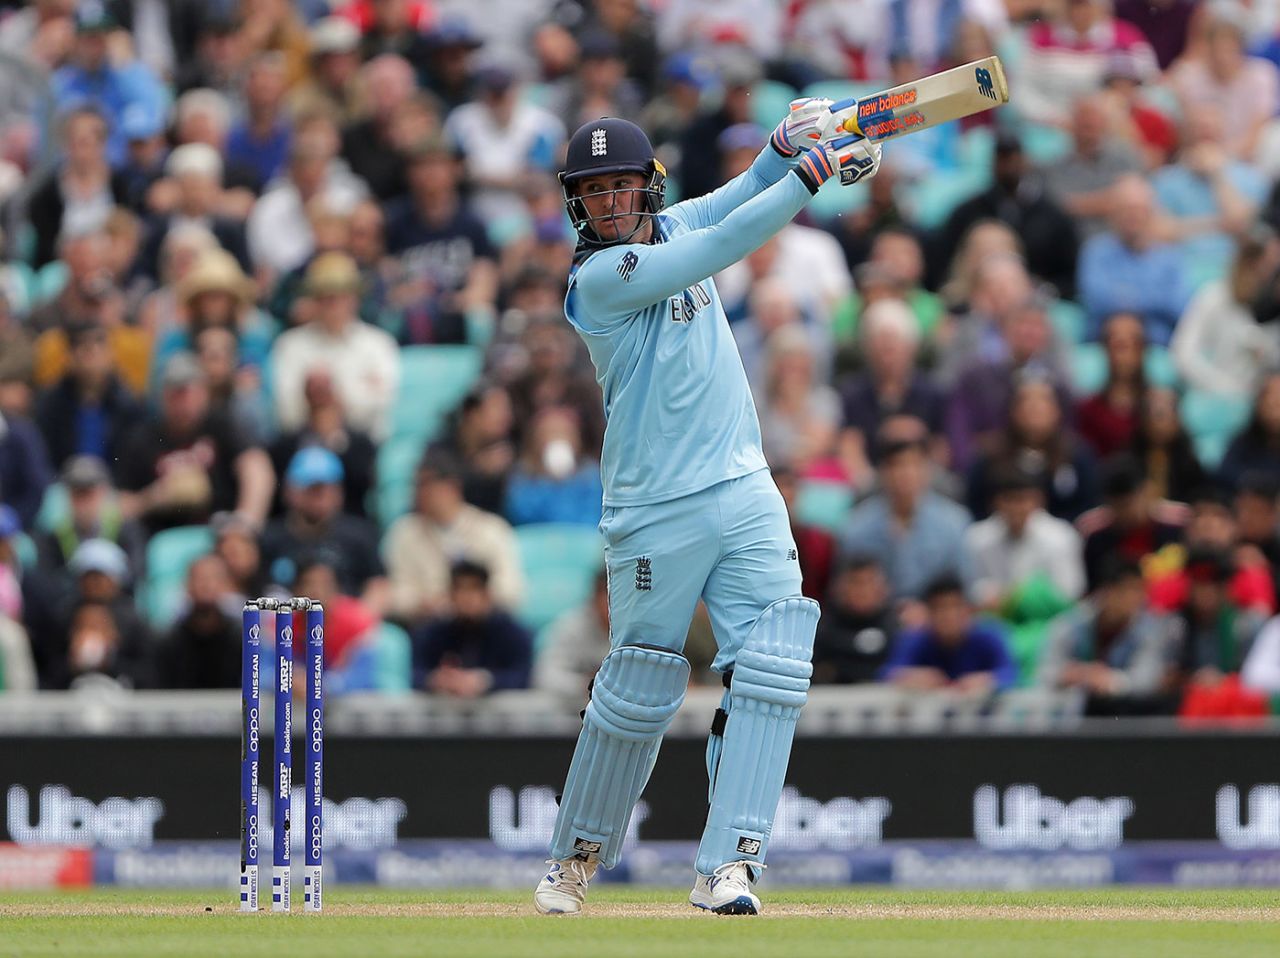 Jason Roy carves another boundary through the off side, England v Afghanistan, World Cup 2019 warm-ups, The Oval, May 27, 2019